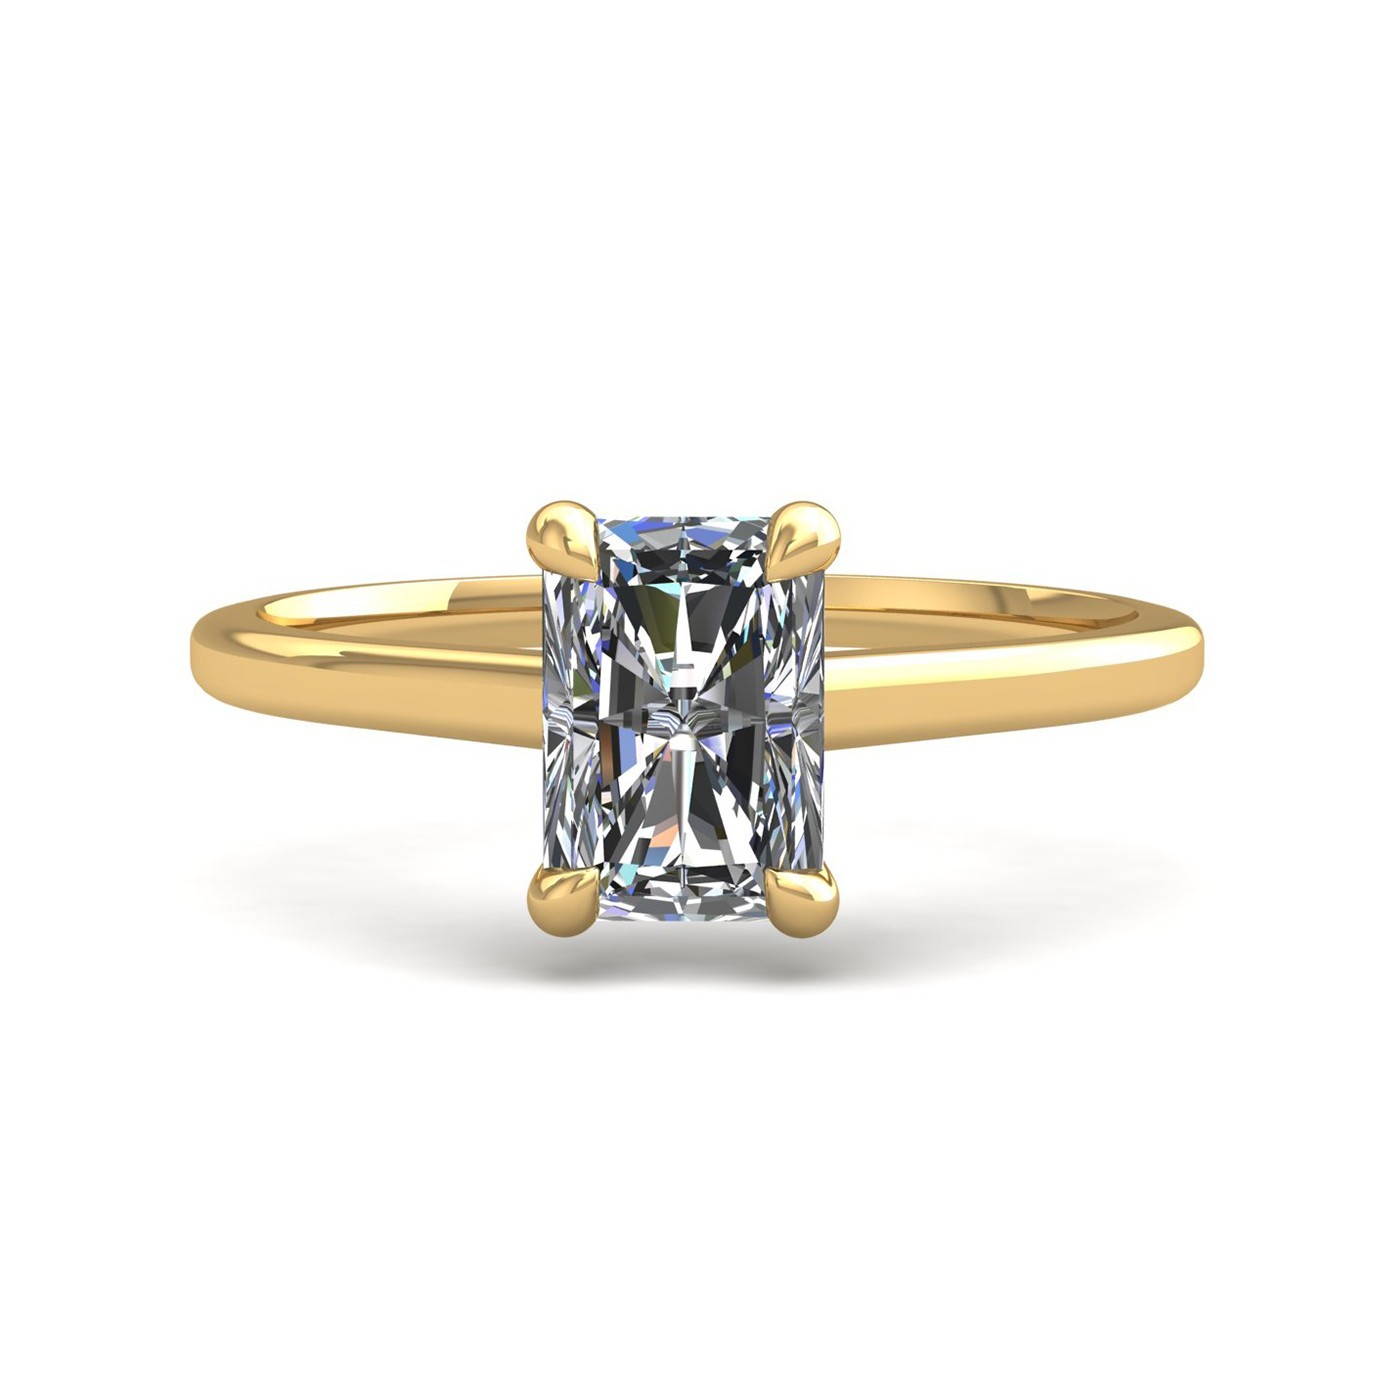 18k yellow gold  1,20 ct 4 prongs solitaire radiant cut diamond engagement ring with whisper thin band Photos & images